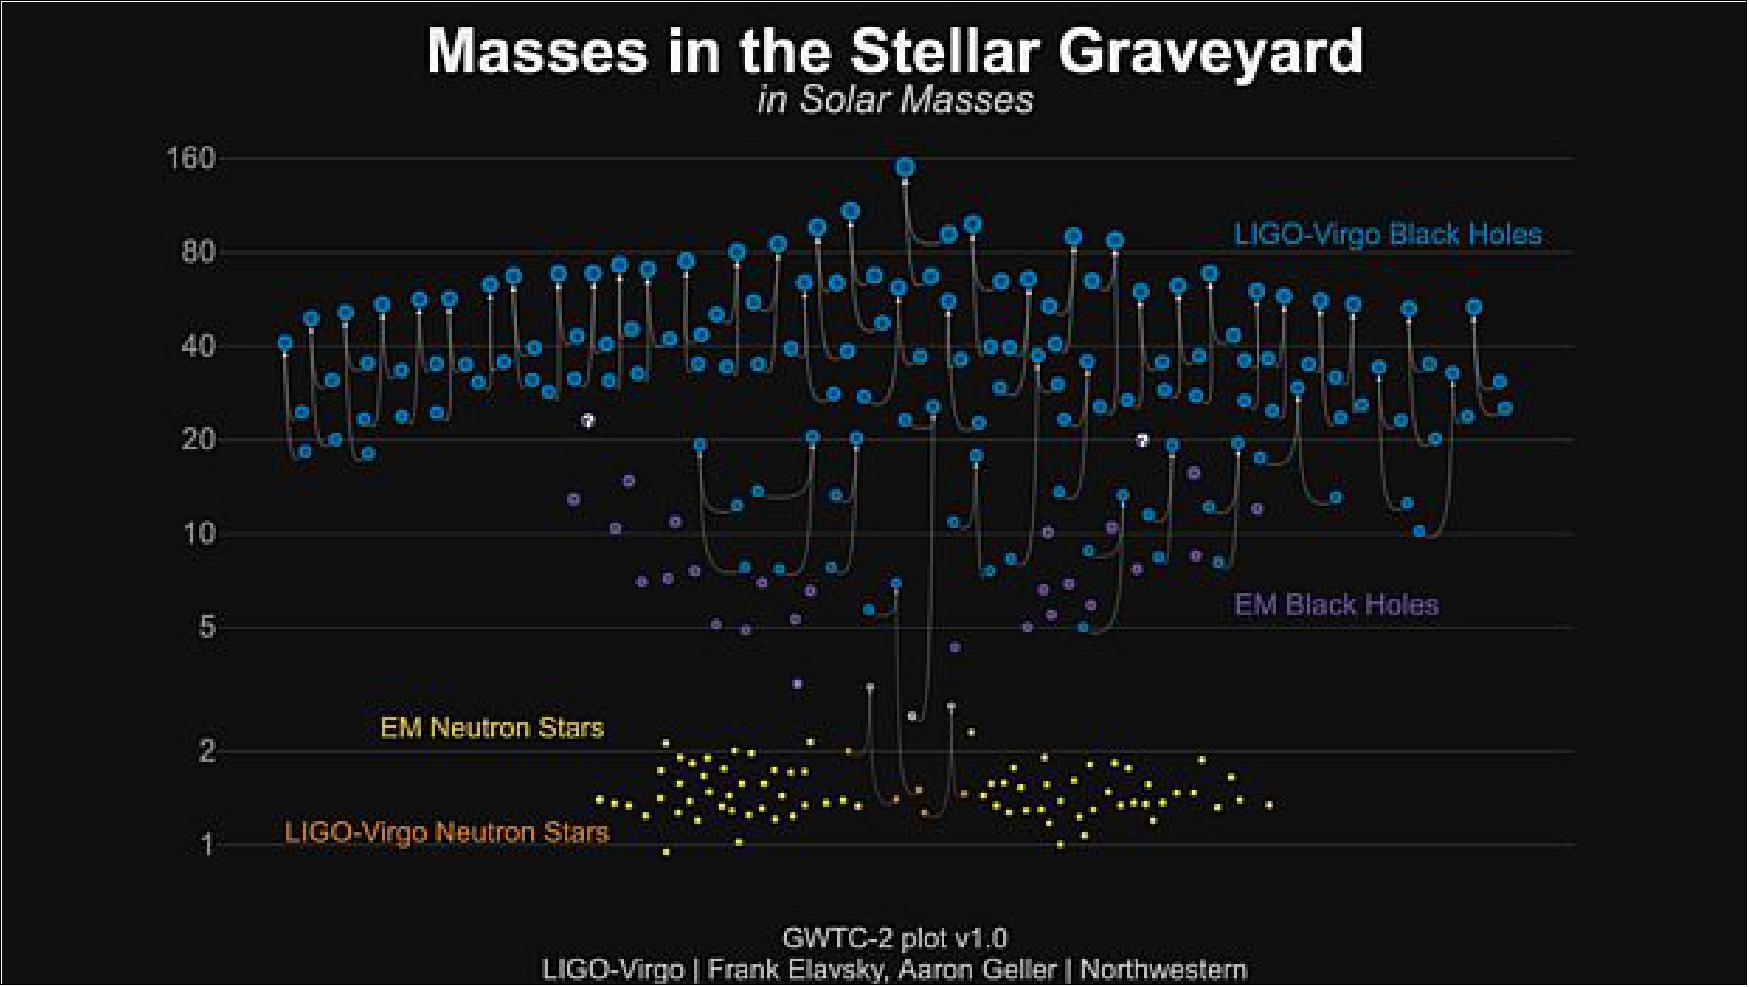 Figure 10: The second catalog of gravitational wave events "GWTC-2", was published today. Since September 2015, LIGO/Virgo have detected 50 gravitational waves, including 39 new ones just from the first half of O3. This graphic illustrates the current total number and masses of LIGO/Virgo black hole and neutron star merger events (in blue) compared with previously known black holes (in purple). Mergers are indicated by arrows connecting two progenitor objects with a final merged object of higher mass (image credit: LIGO-Virgo / Northwestern U / Frank Elavsky & Aaron Geller)